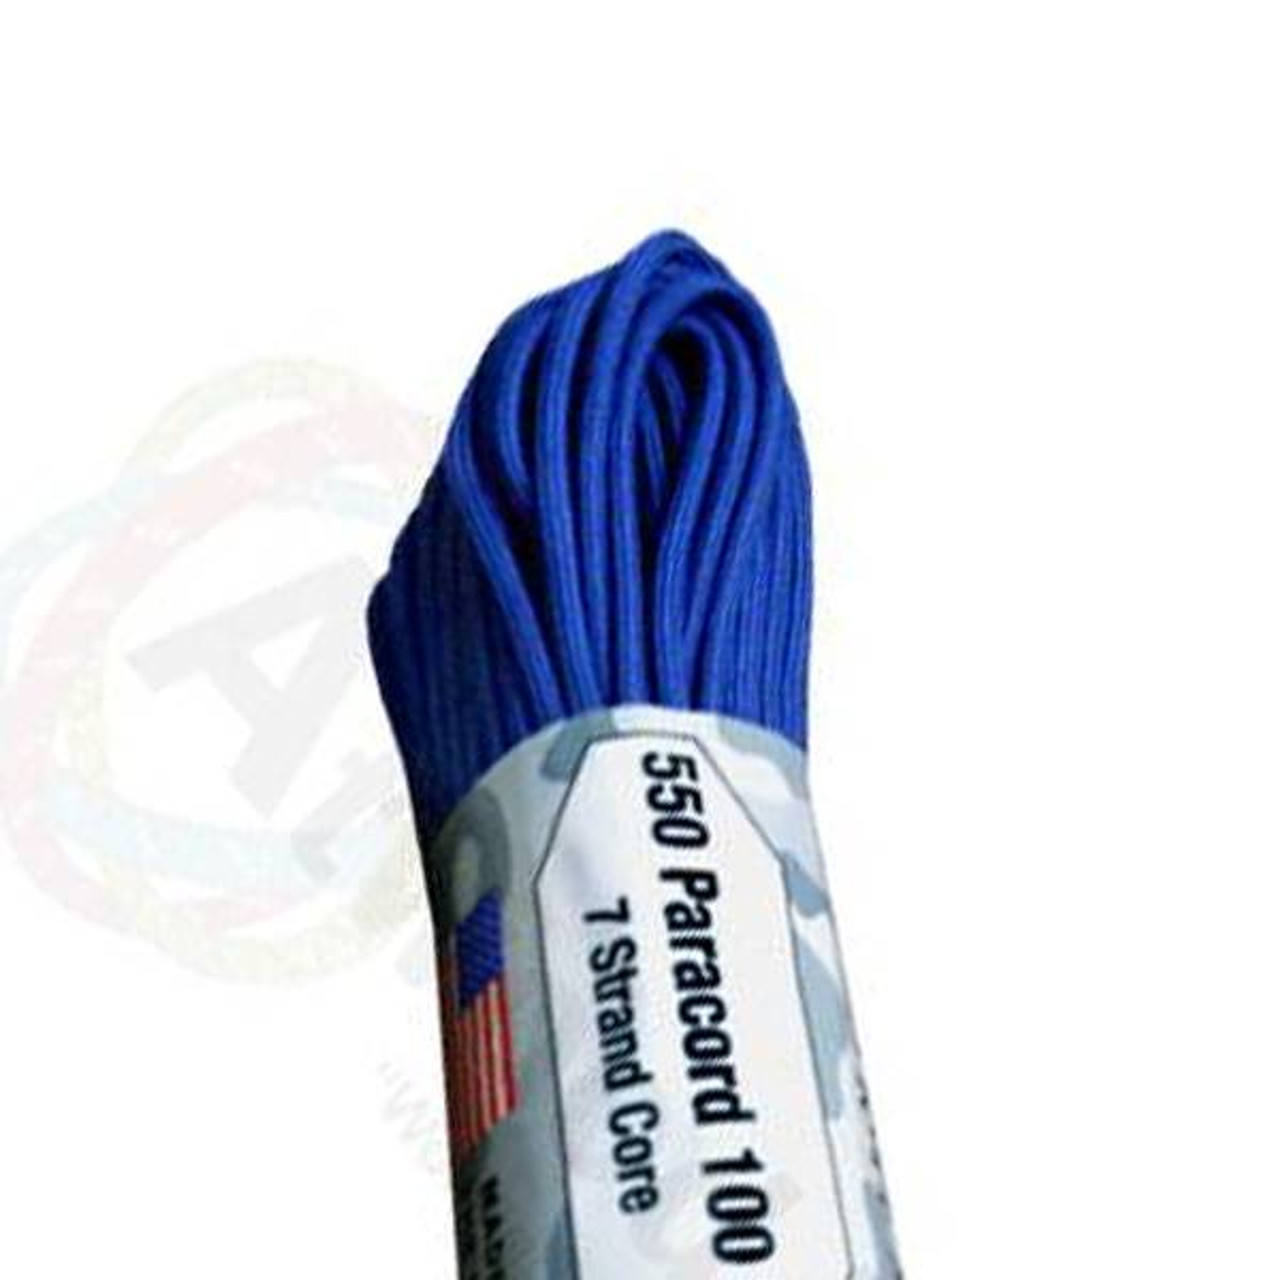 Atwood Rope MFG 550 Paracord 100ft - Royal Blue